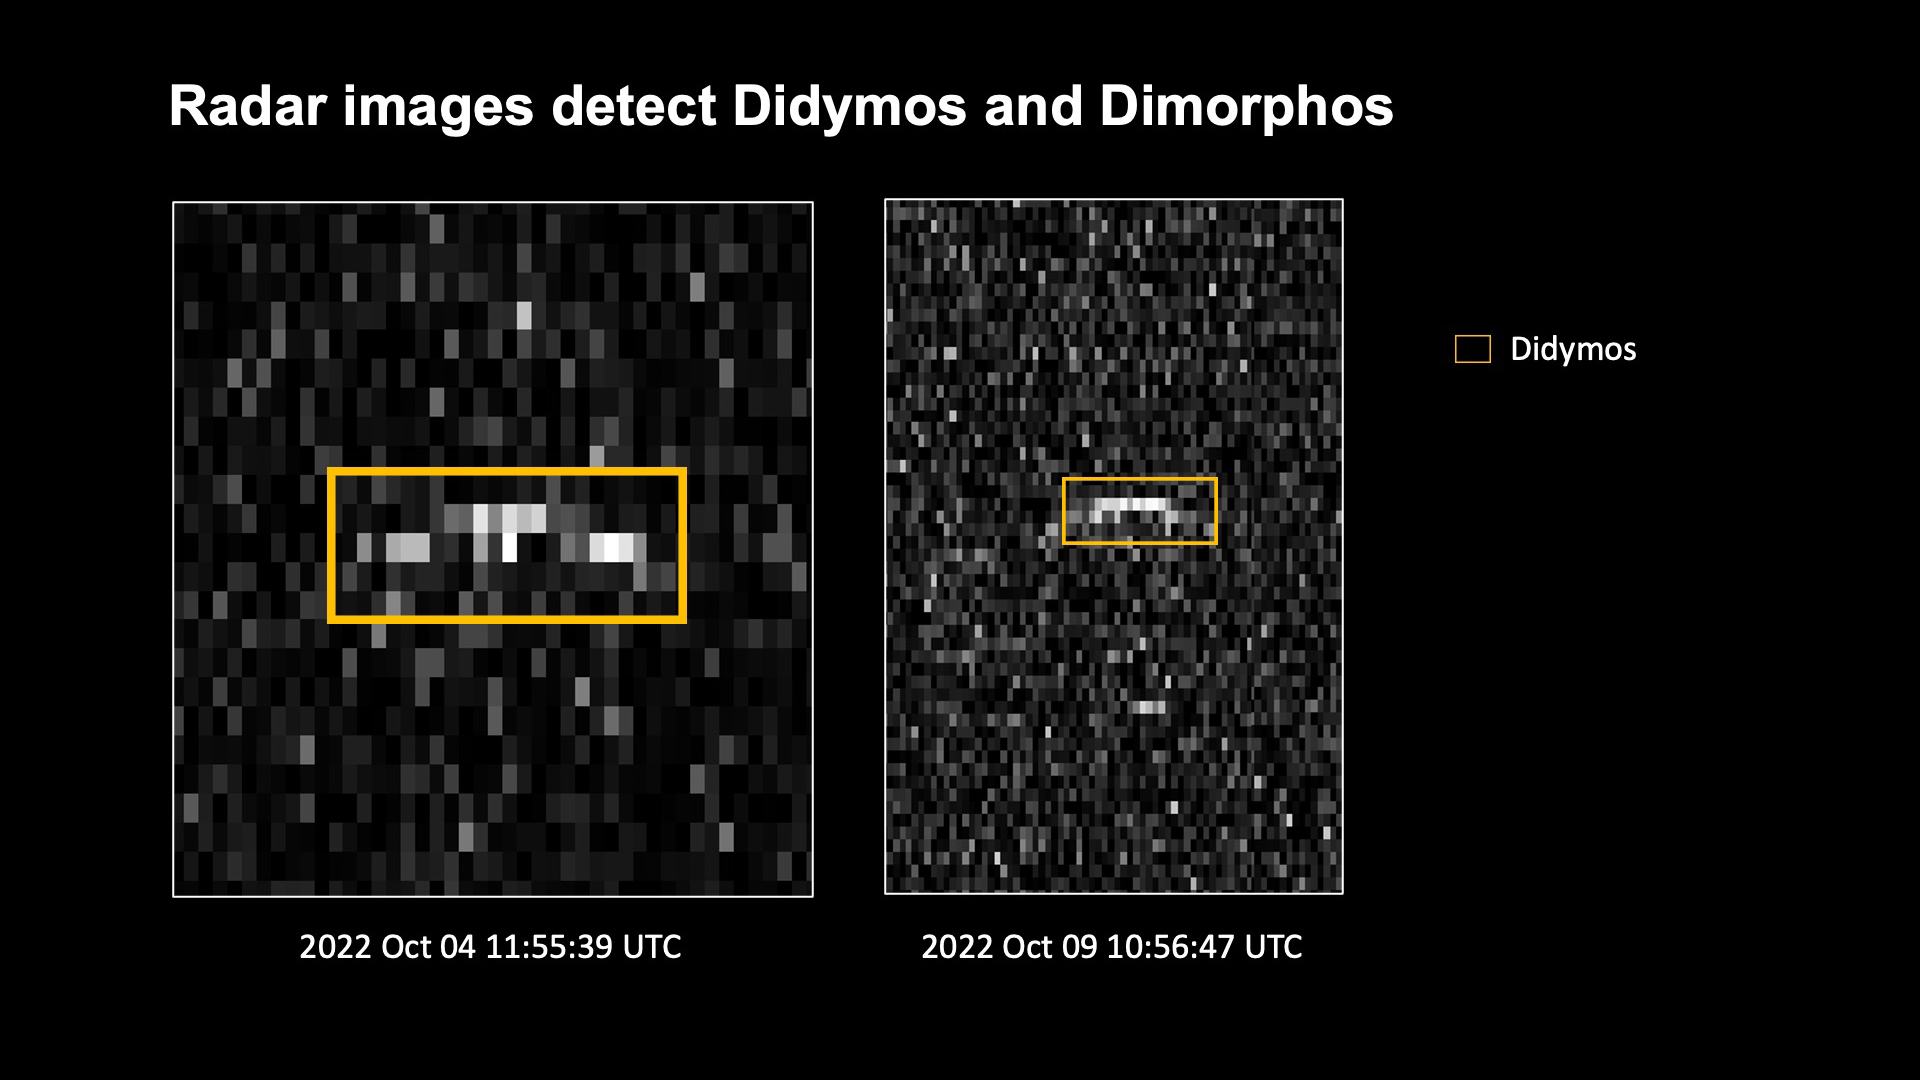 The images are views of the Didymos and Dimorphos binary asteroid system